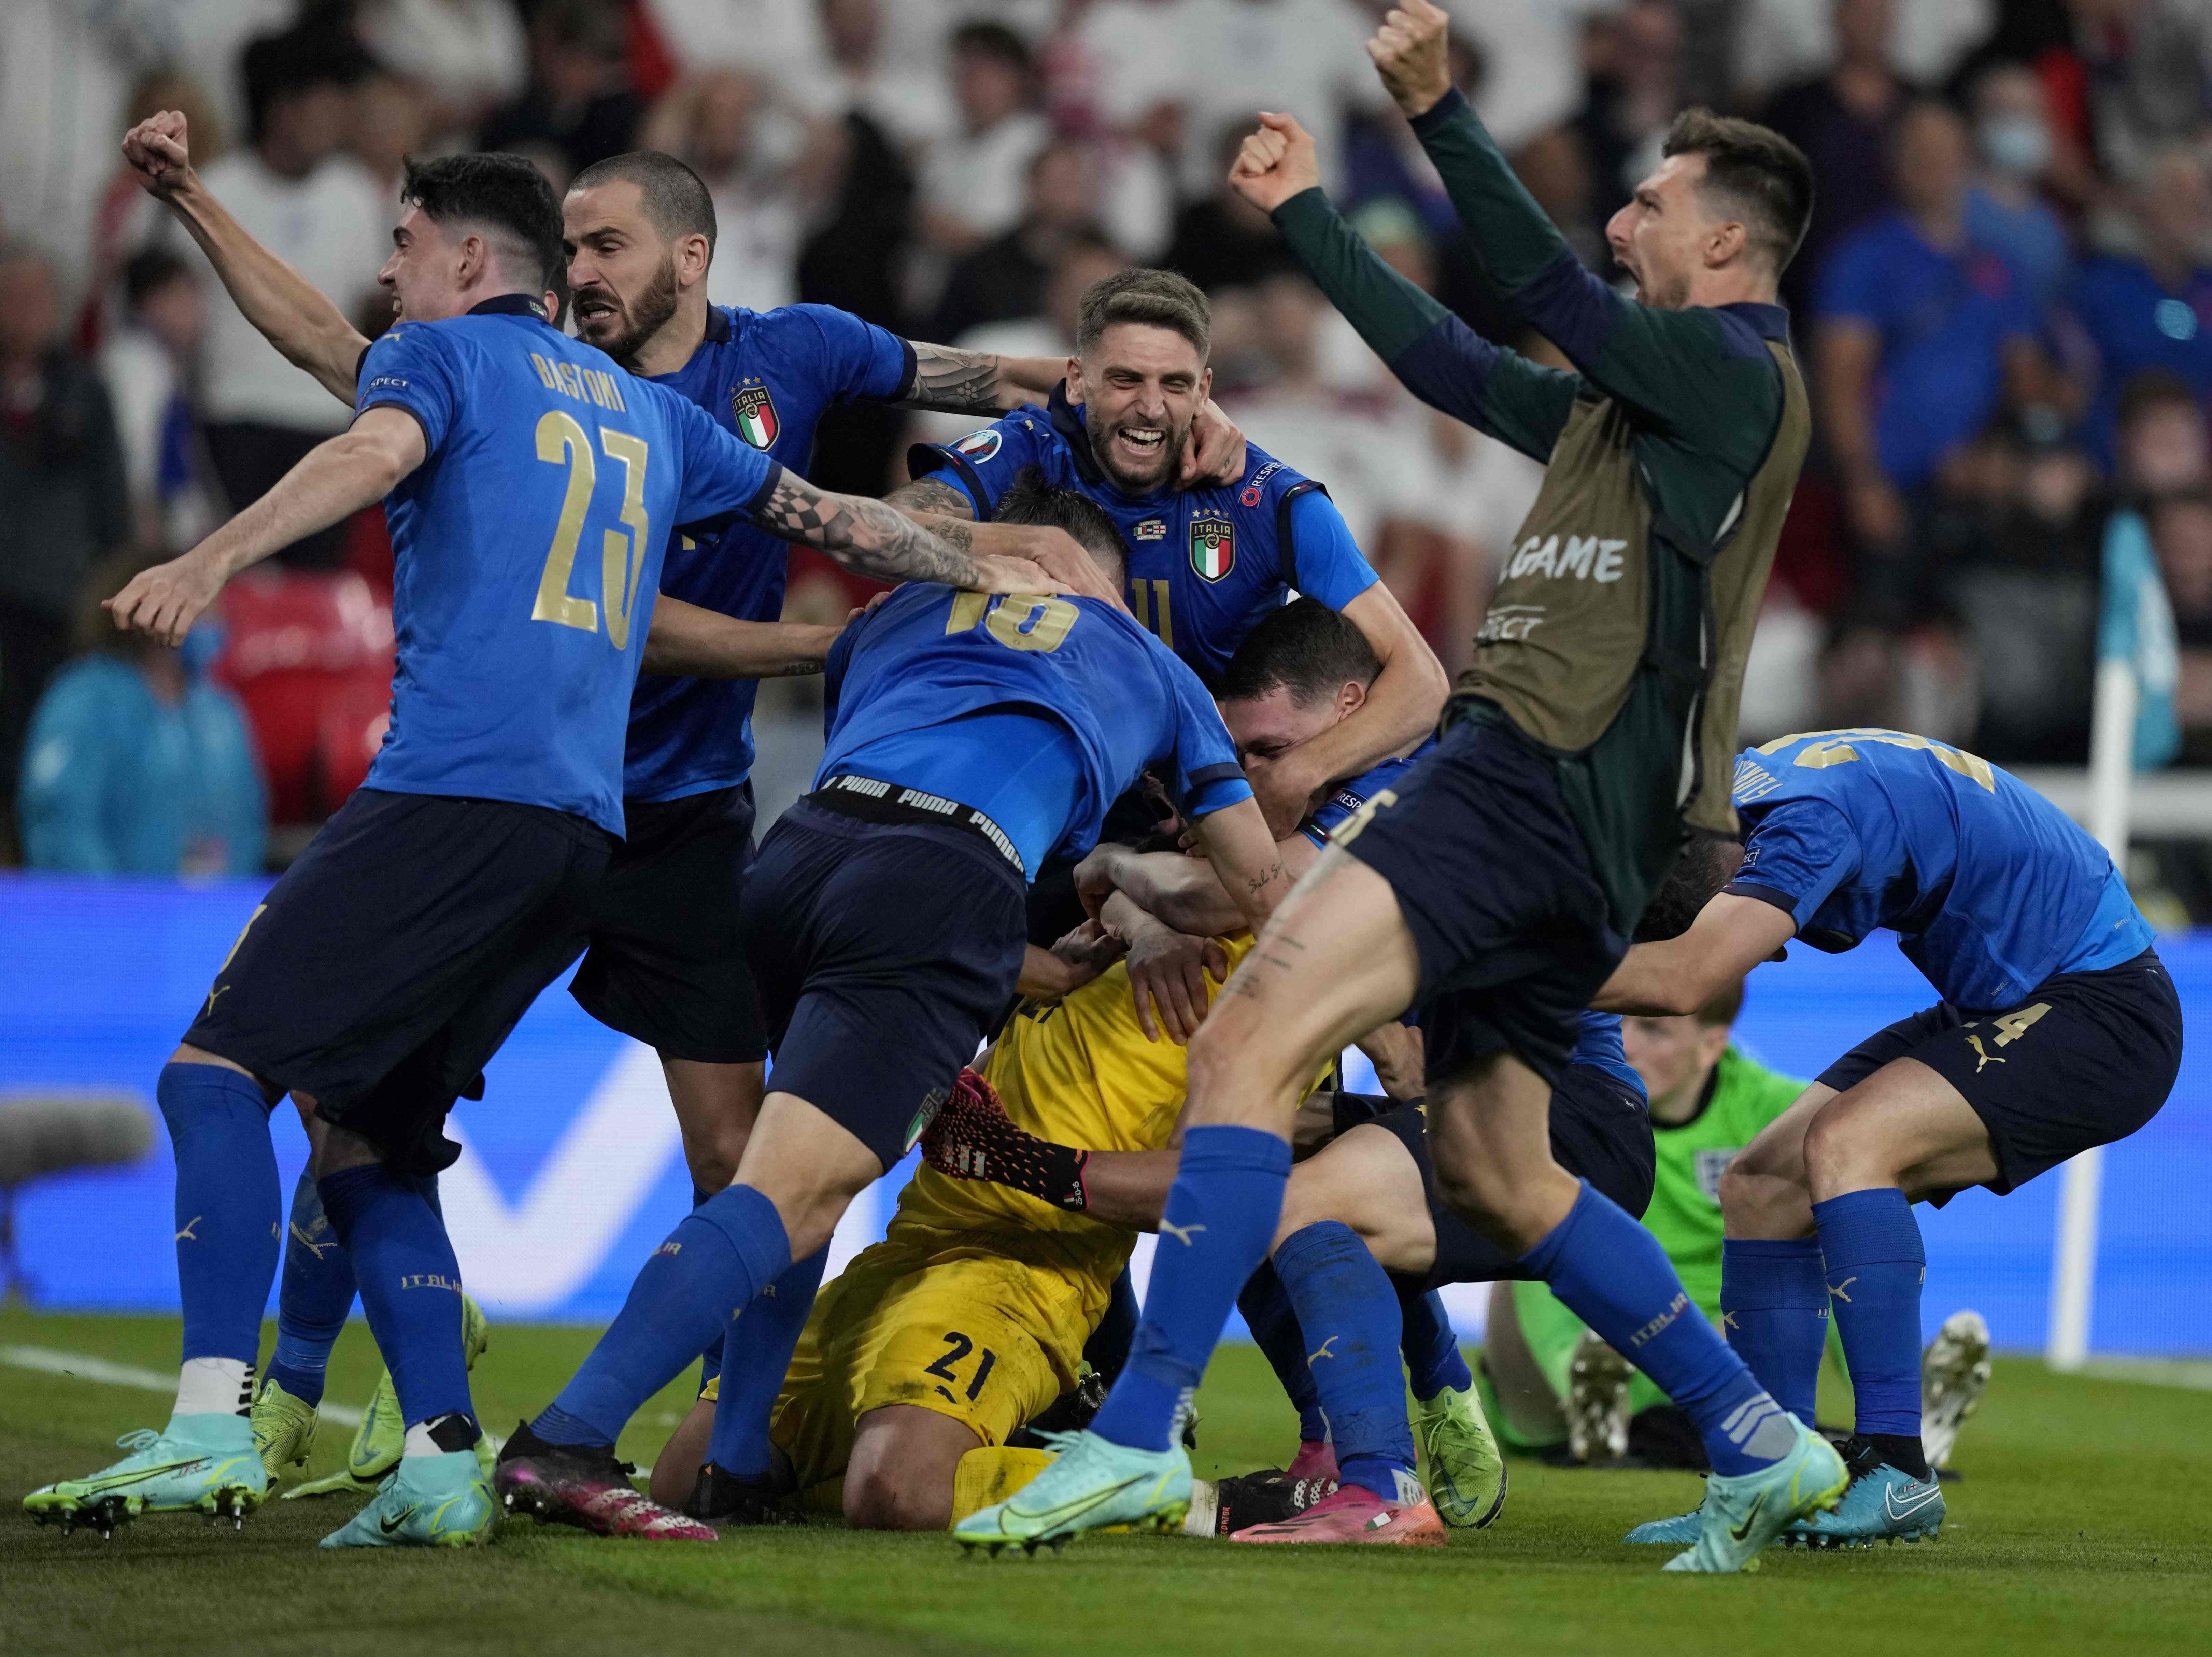 Italy players celebrate after winning the Uefa Euro 2020 final football match between Italy and England at Wembley Stadium in London on Sunday. Photo: AFP